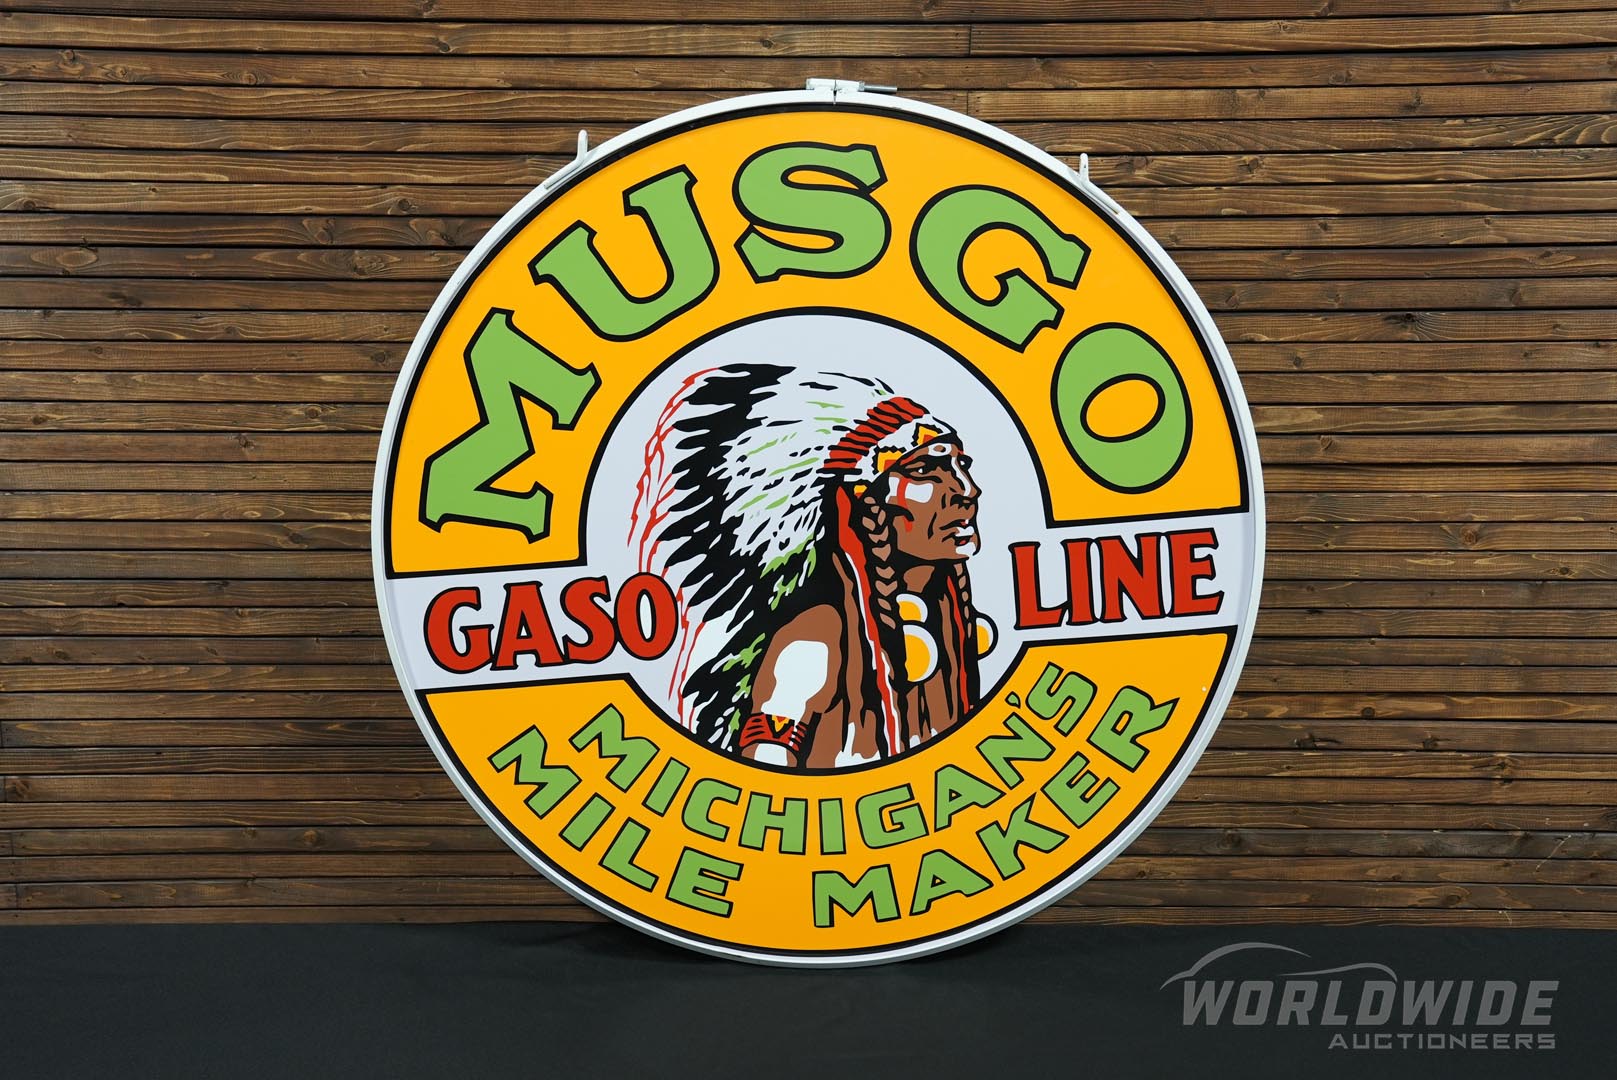  Musgo Gasoline Double-Sided Re plica Sign 